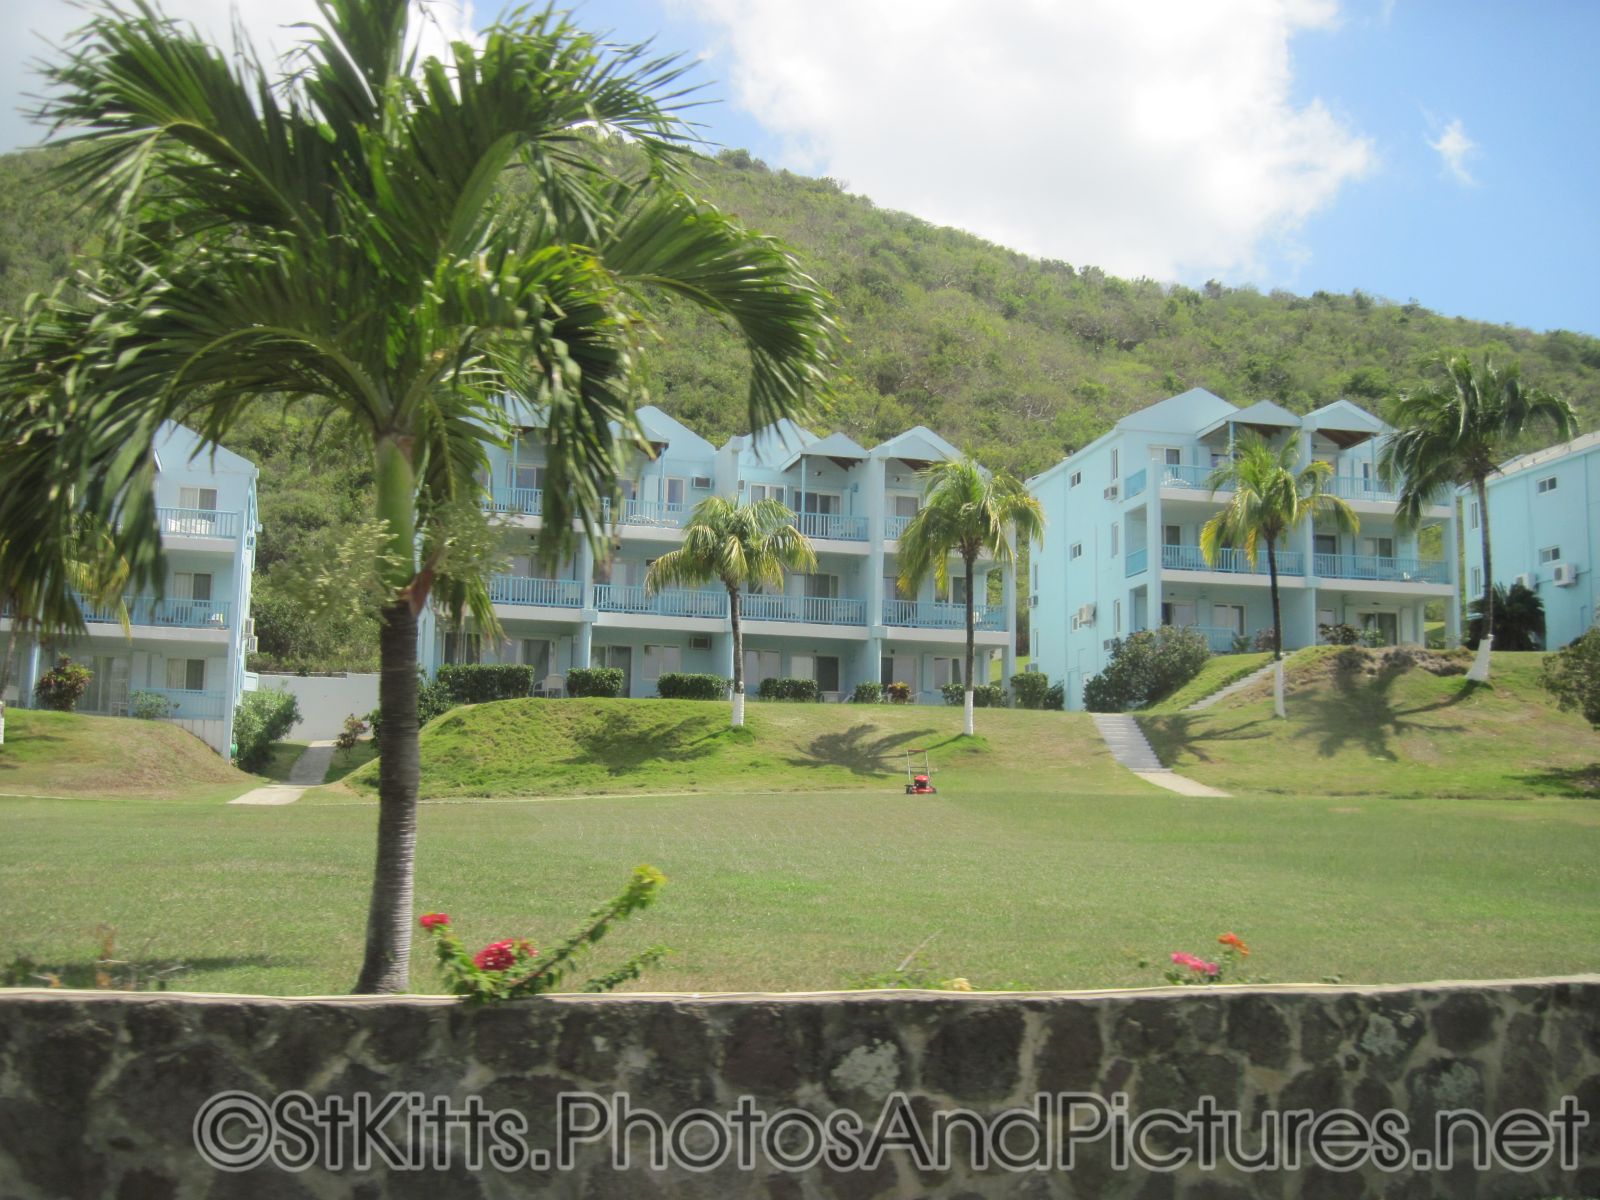 Resort with light blue apartments at Frigate Bay St Kitts.jpg
